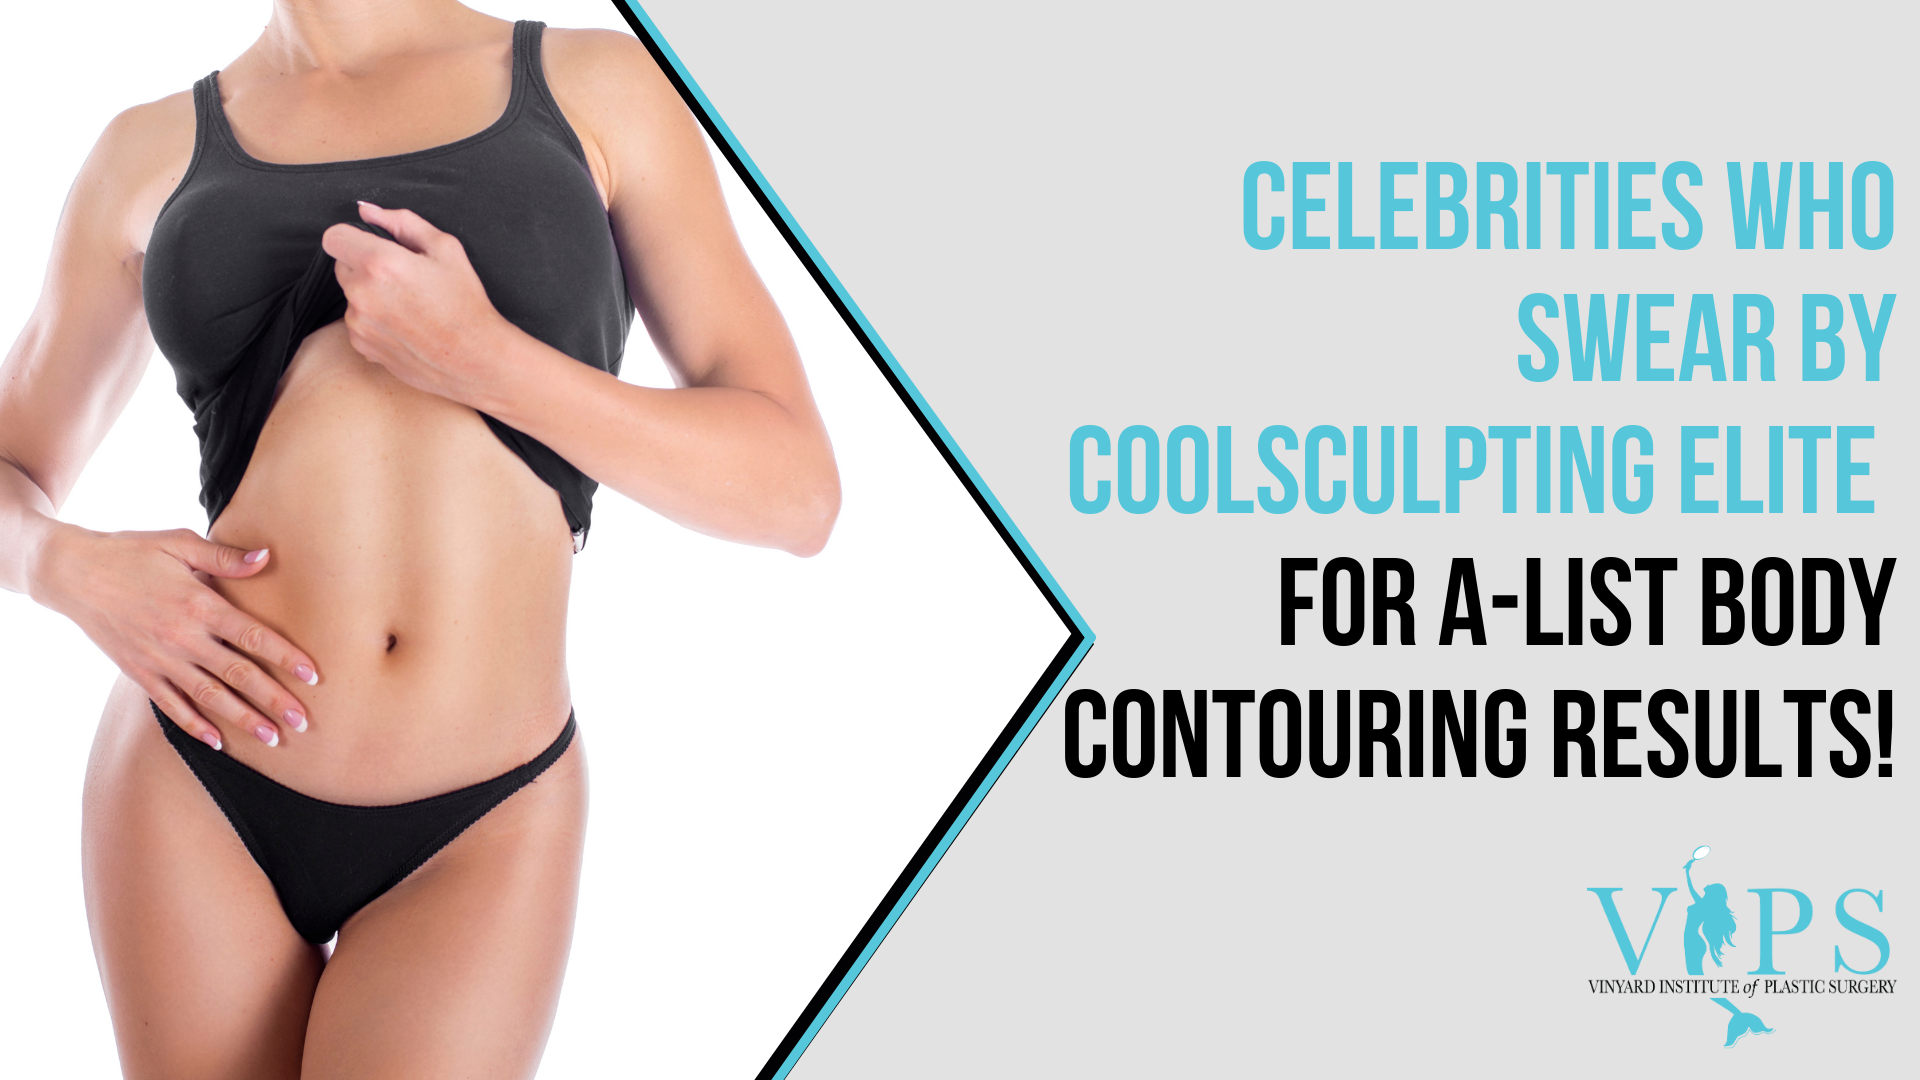 Celebrities Who Swear by CoolSculpting Elite for A-list Body